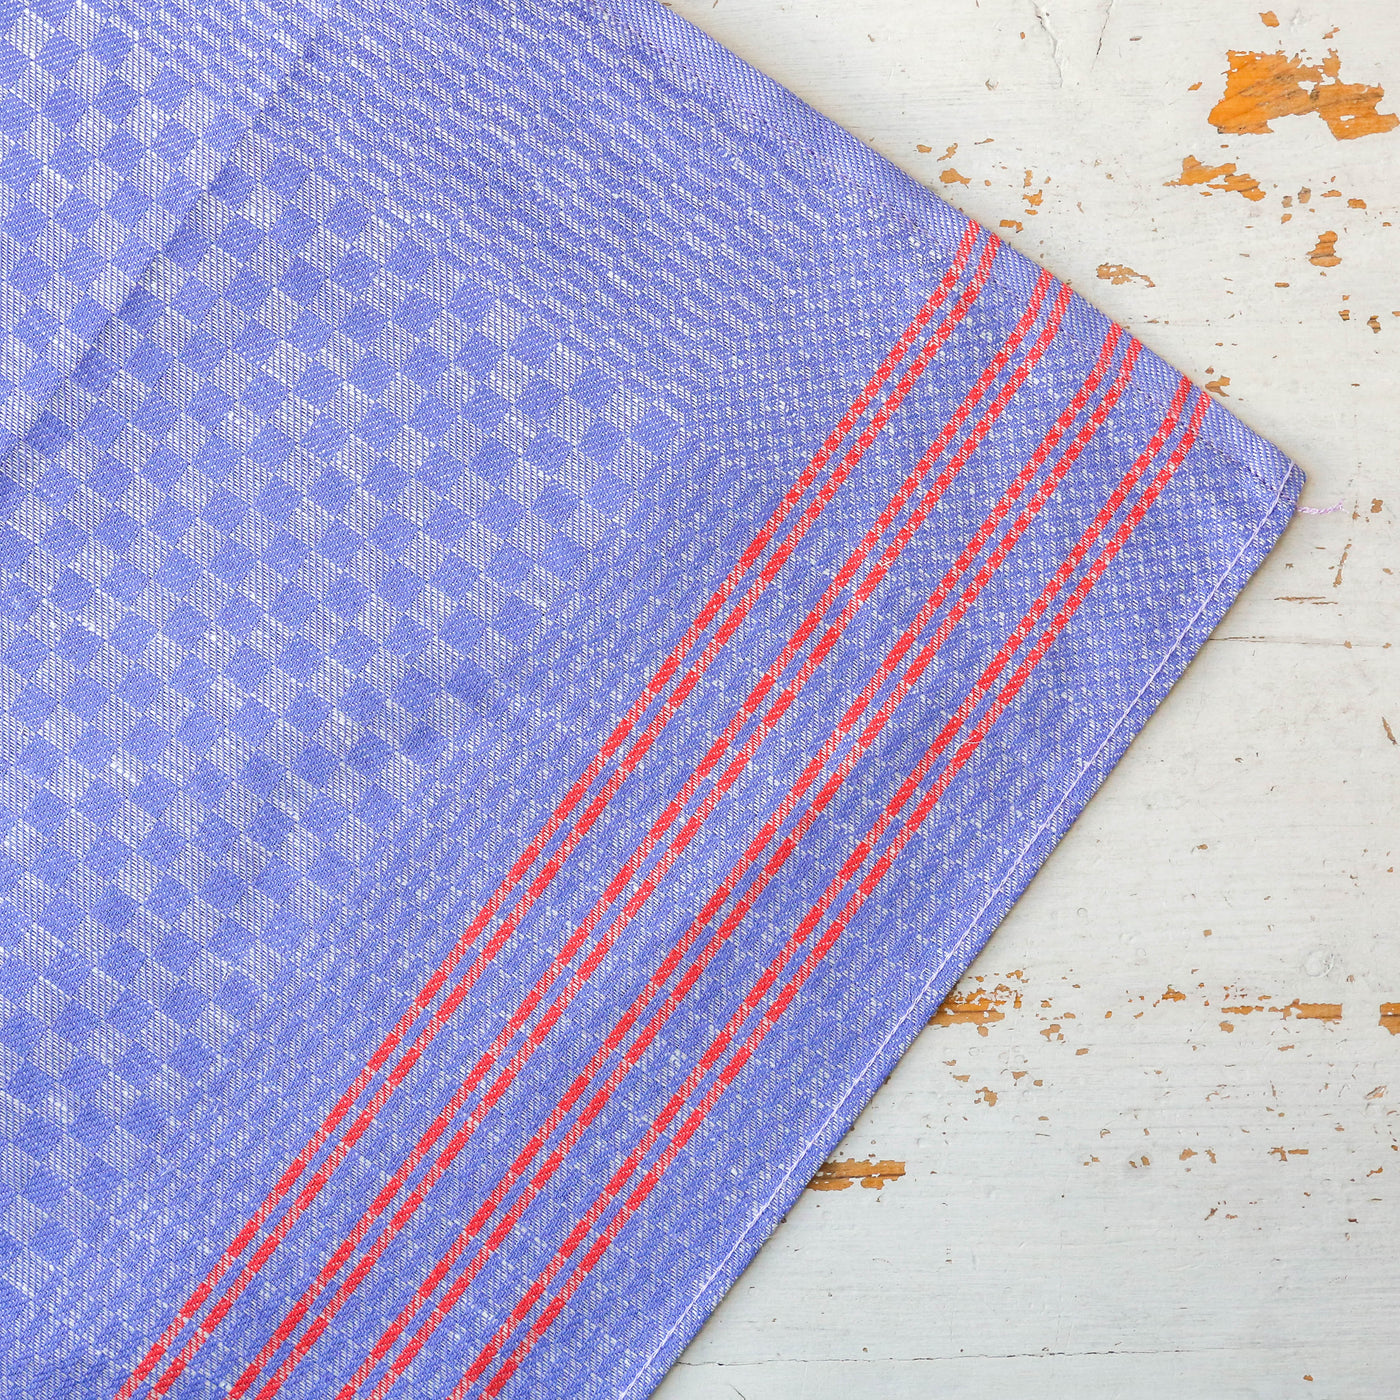 Blue & Red Striped Pit Towel